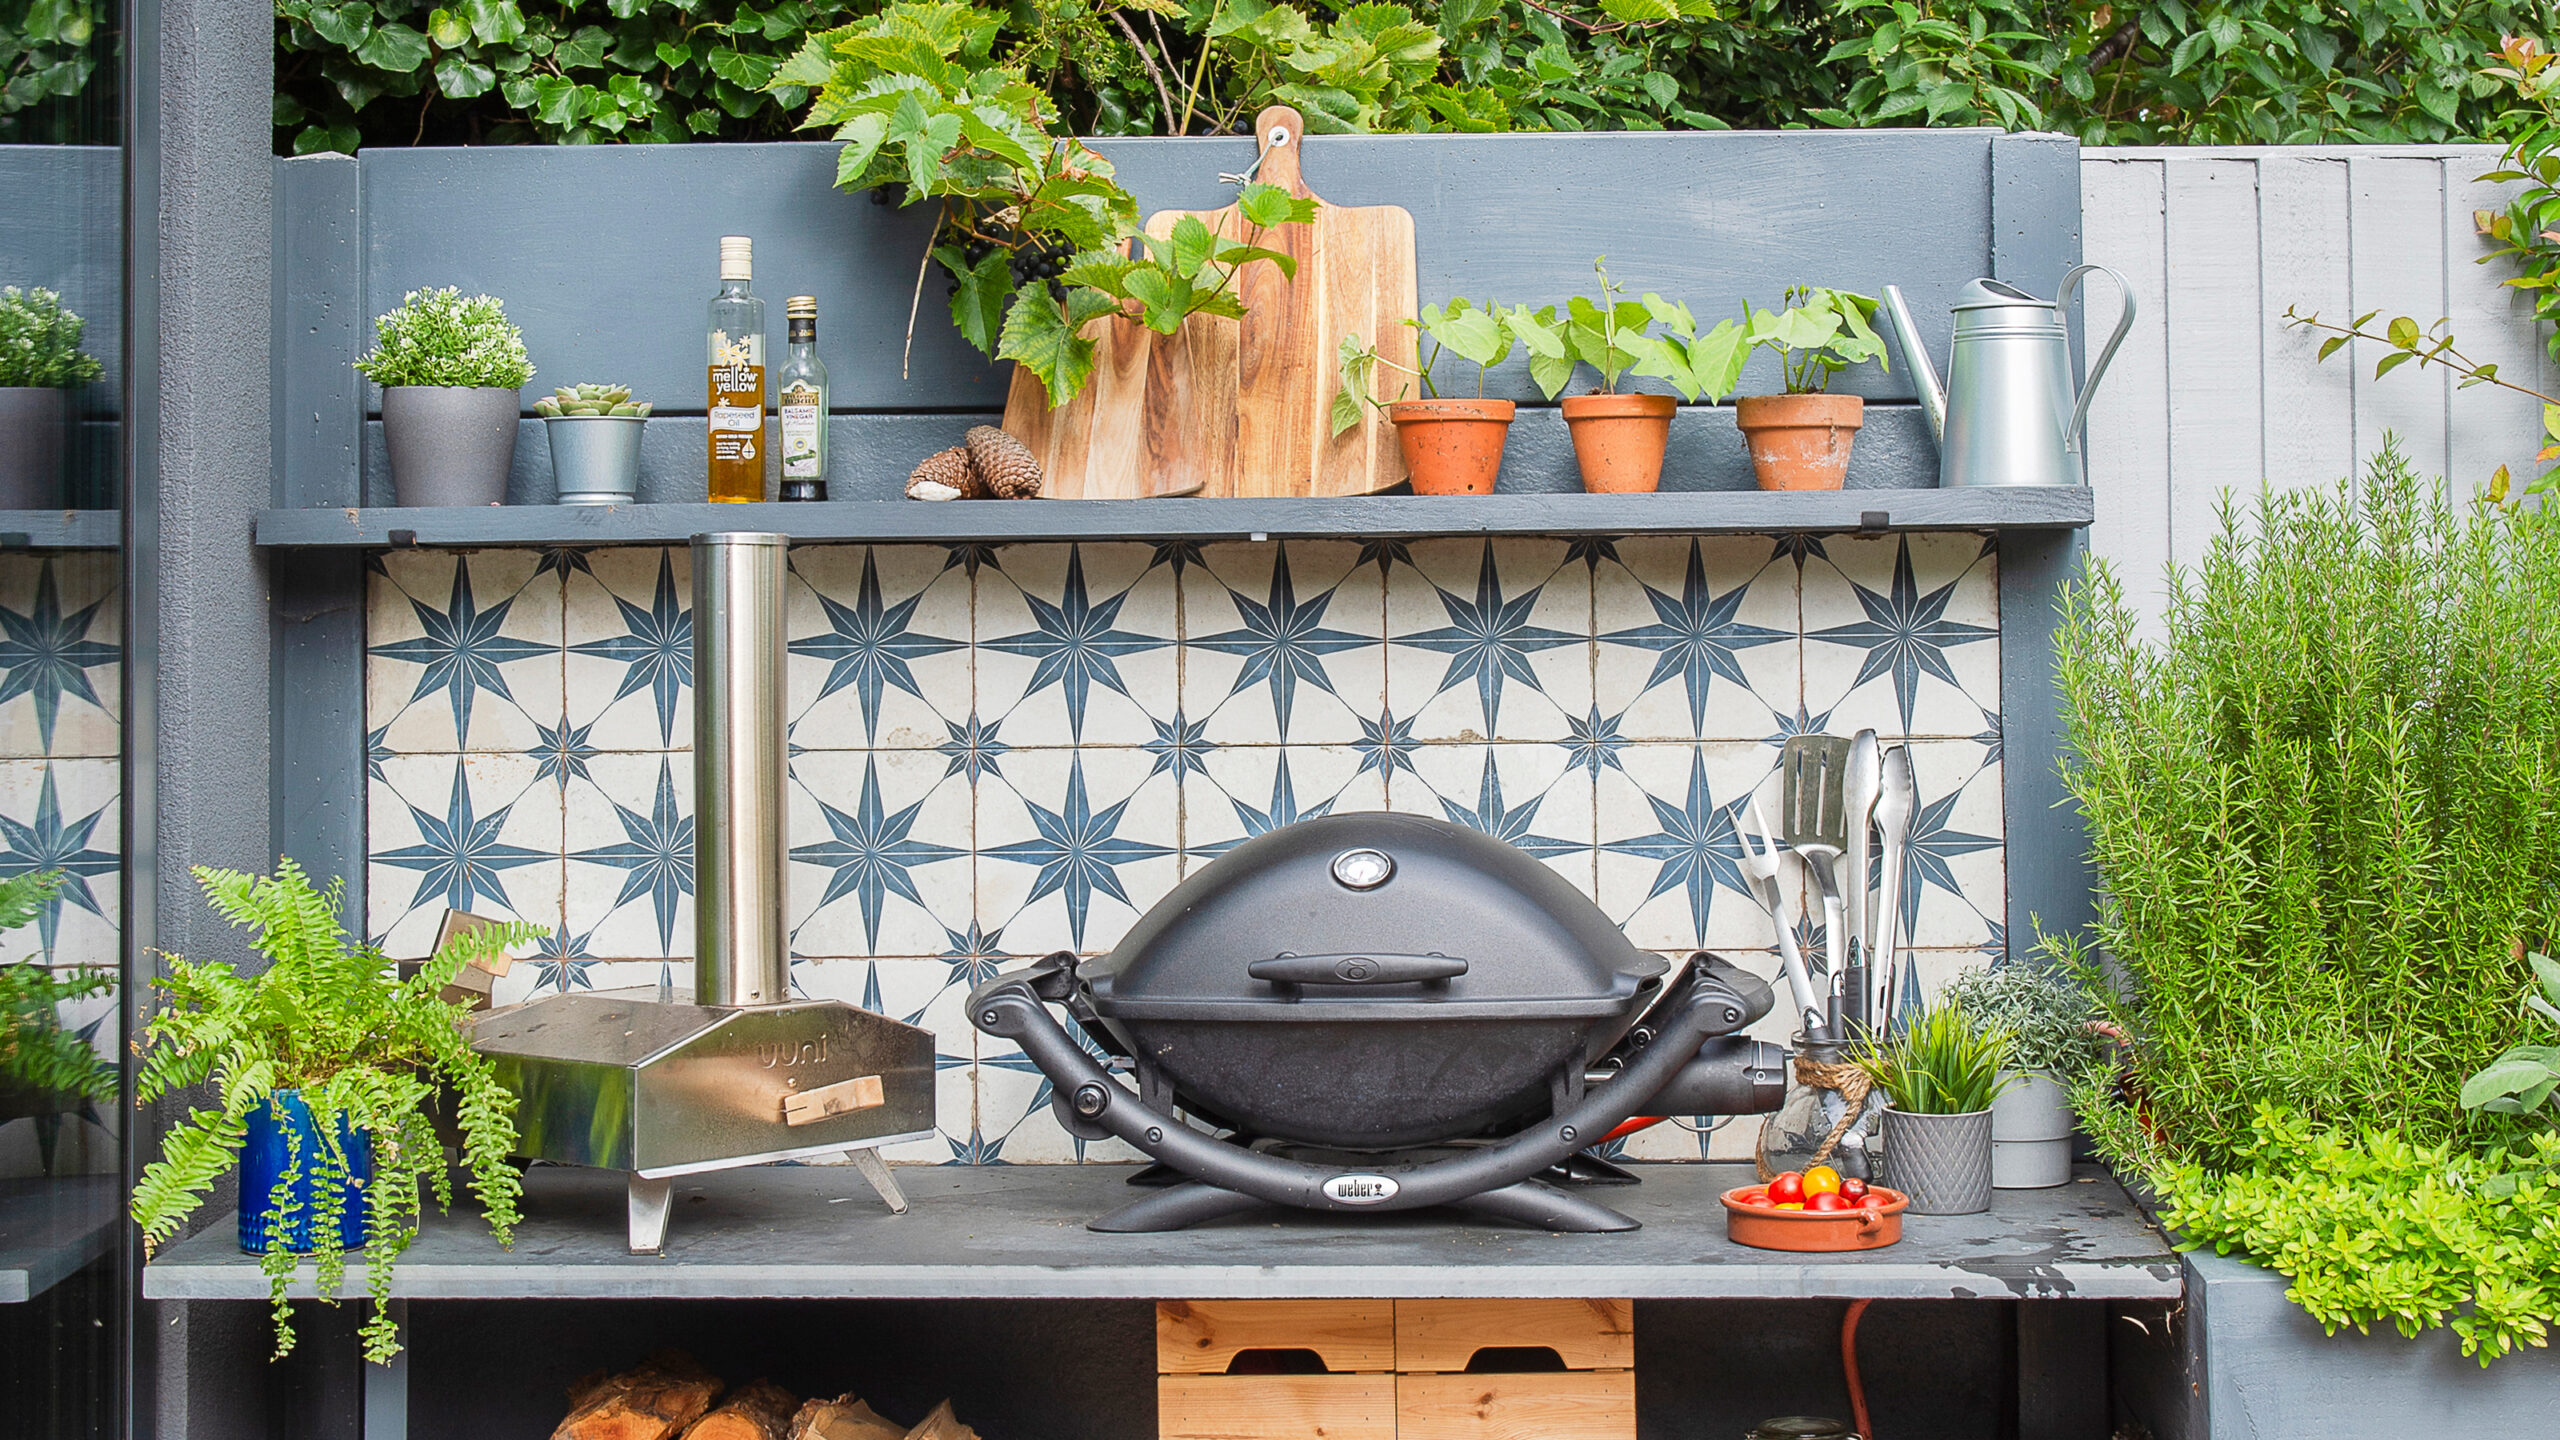 Outdoor Kitchens: Bringing the Joy of Cooking to Your Backyard